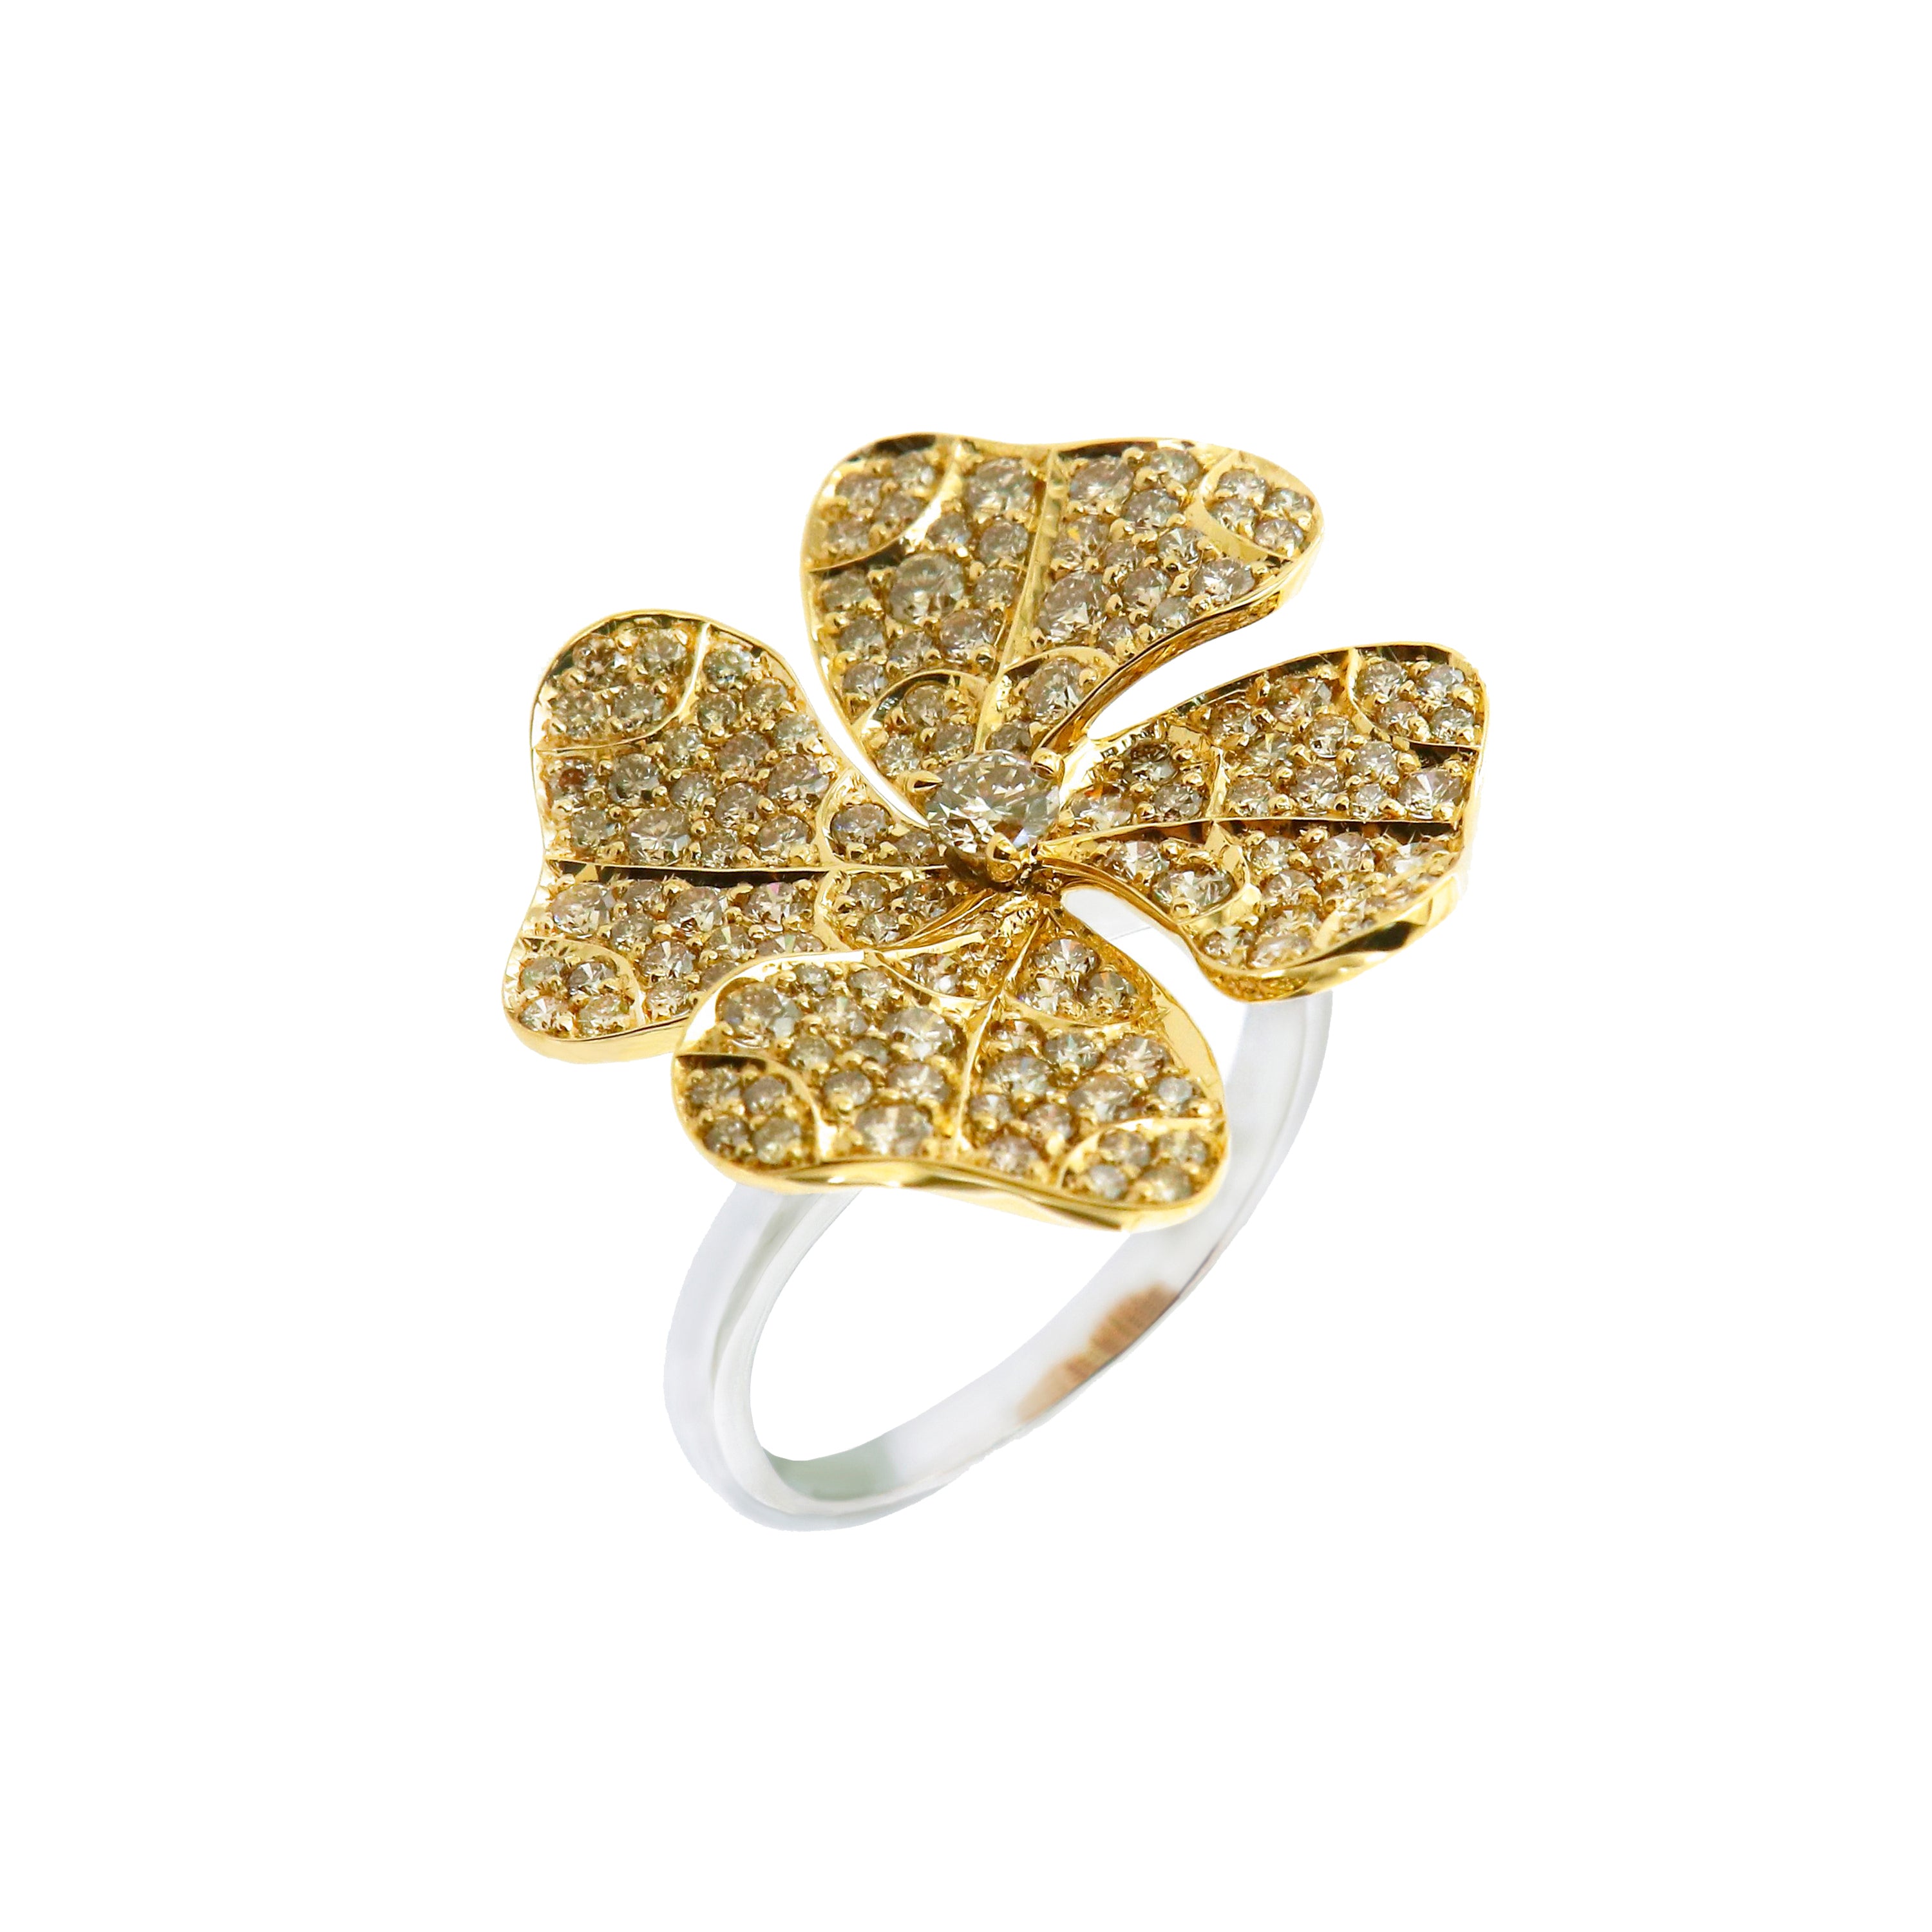 Ring White and Yellow Gold with Brown Diamonds